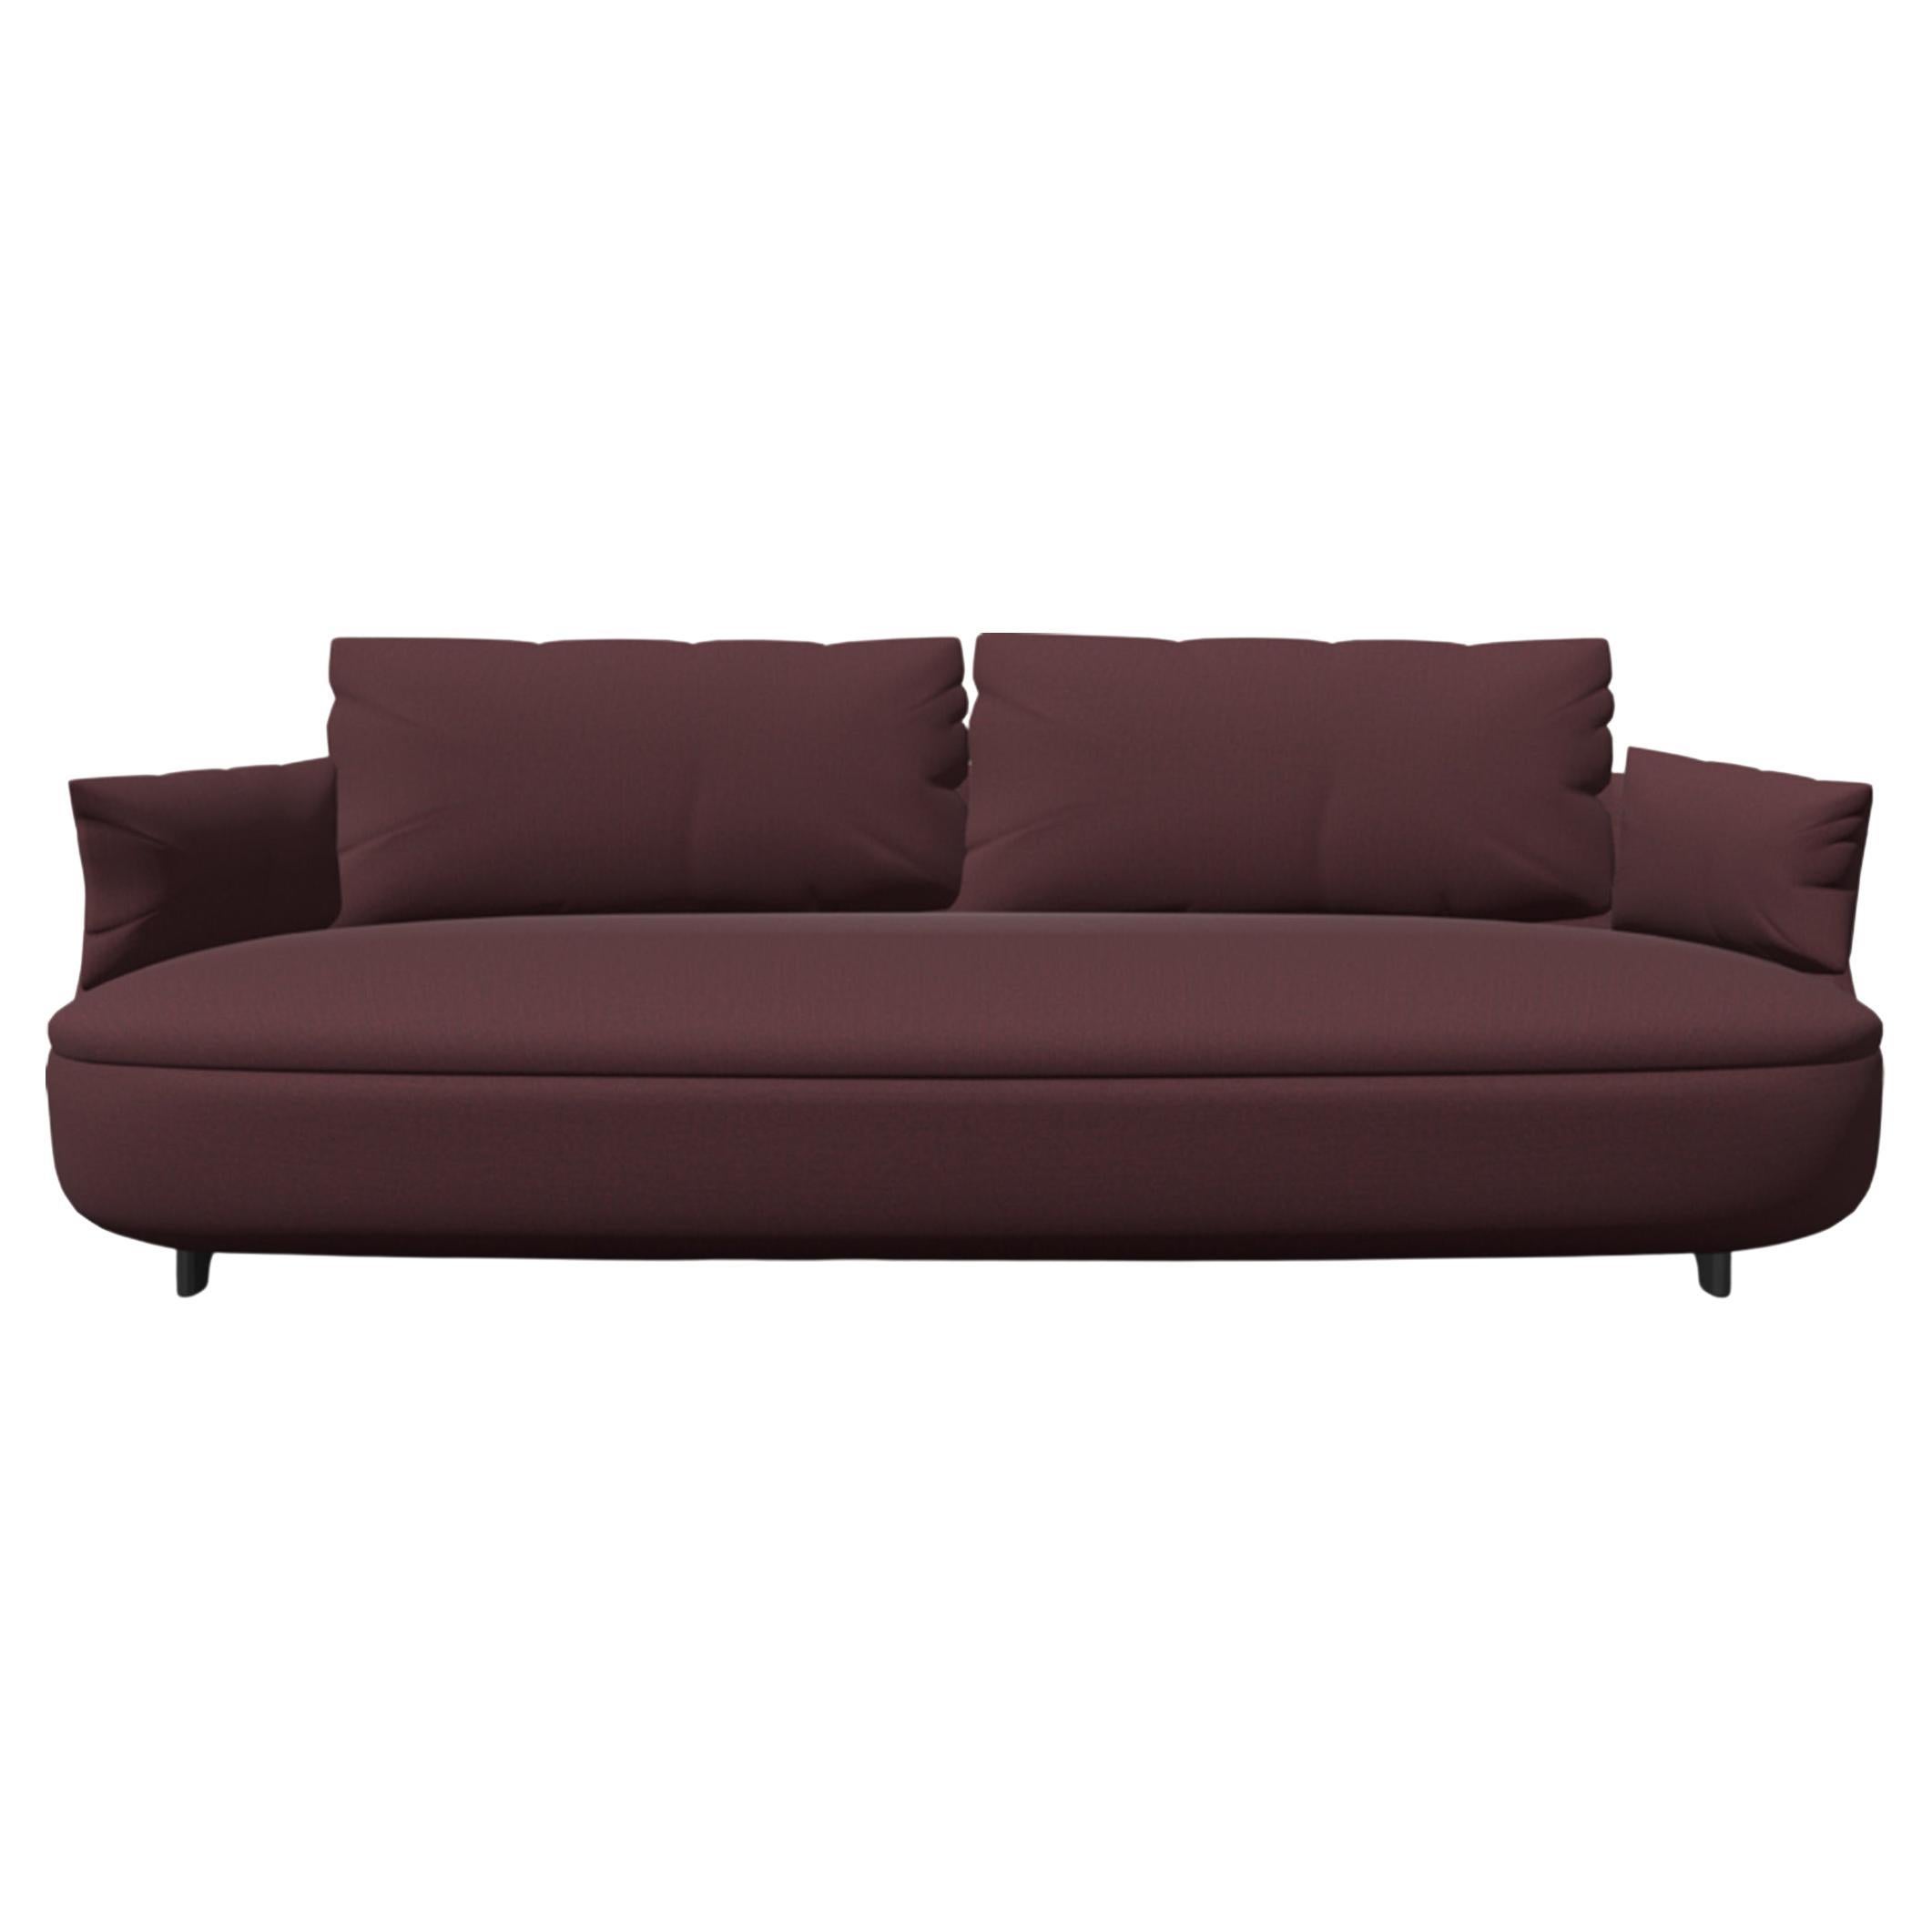 Moooi Bart Canape Sofa in Divina MD, 673 Rote Polsterung